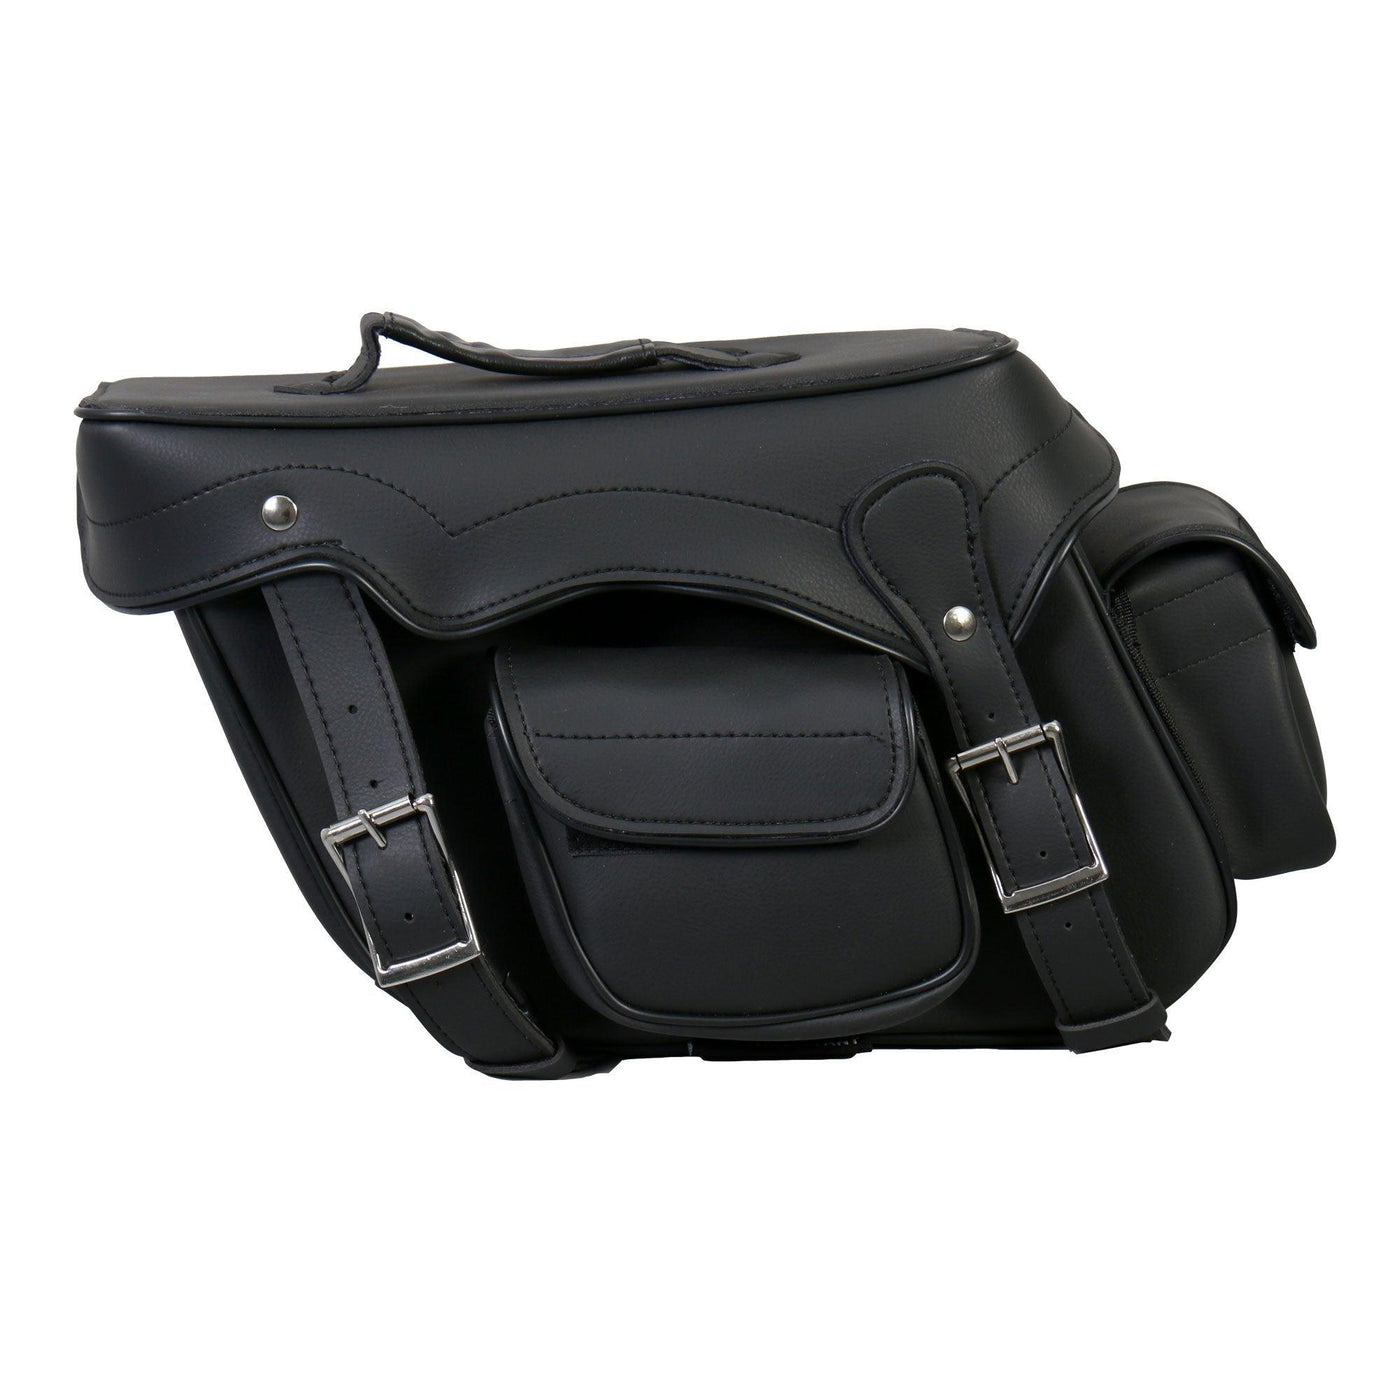 Hot Leathers Extra Large Saddle Bags With Concealed Carry Pocket - American Legend Rider